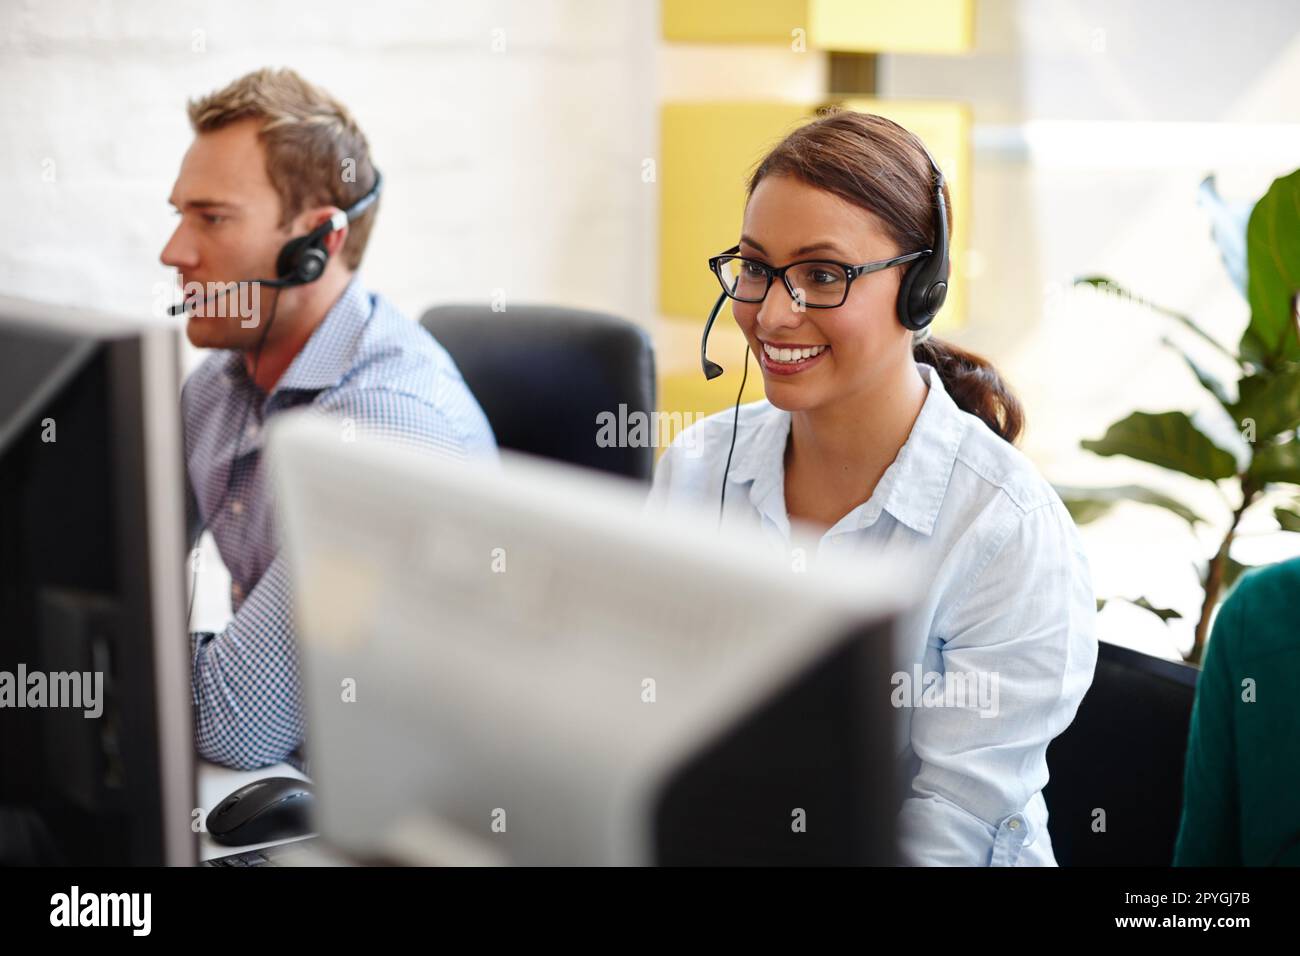 They know how to deal with every sort of client. customer service representatives taking calls in their office. Stock Photo